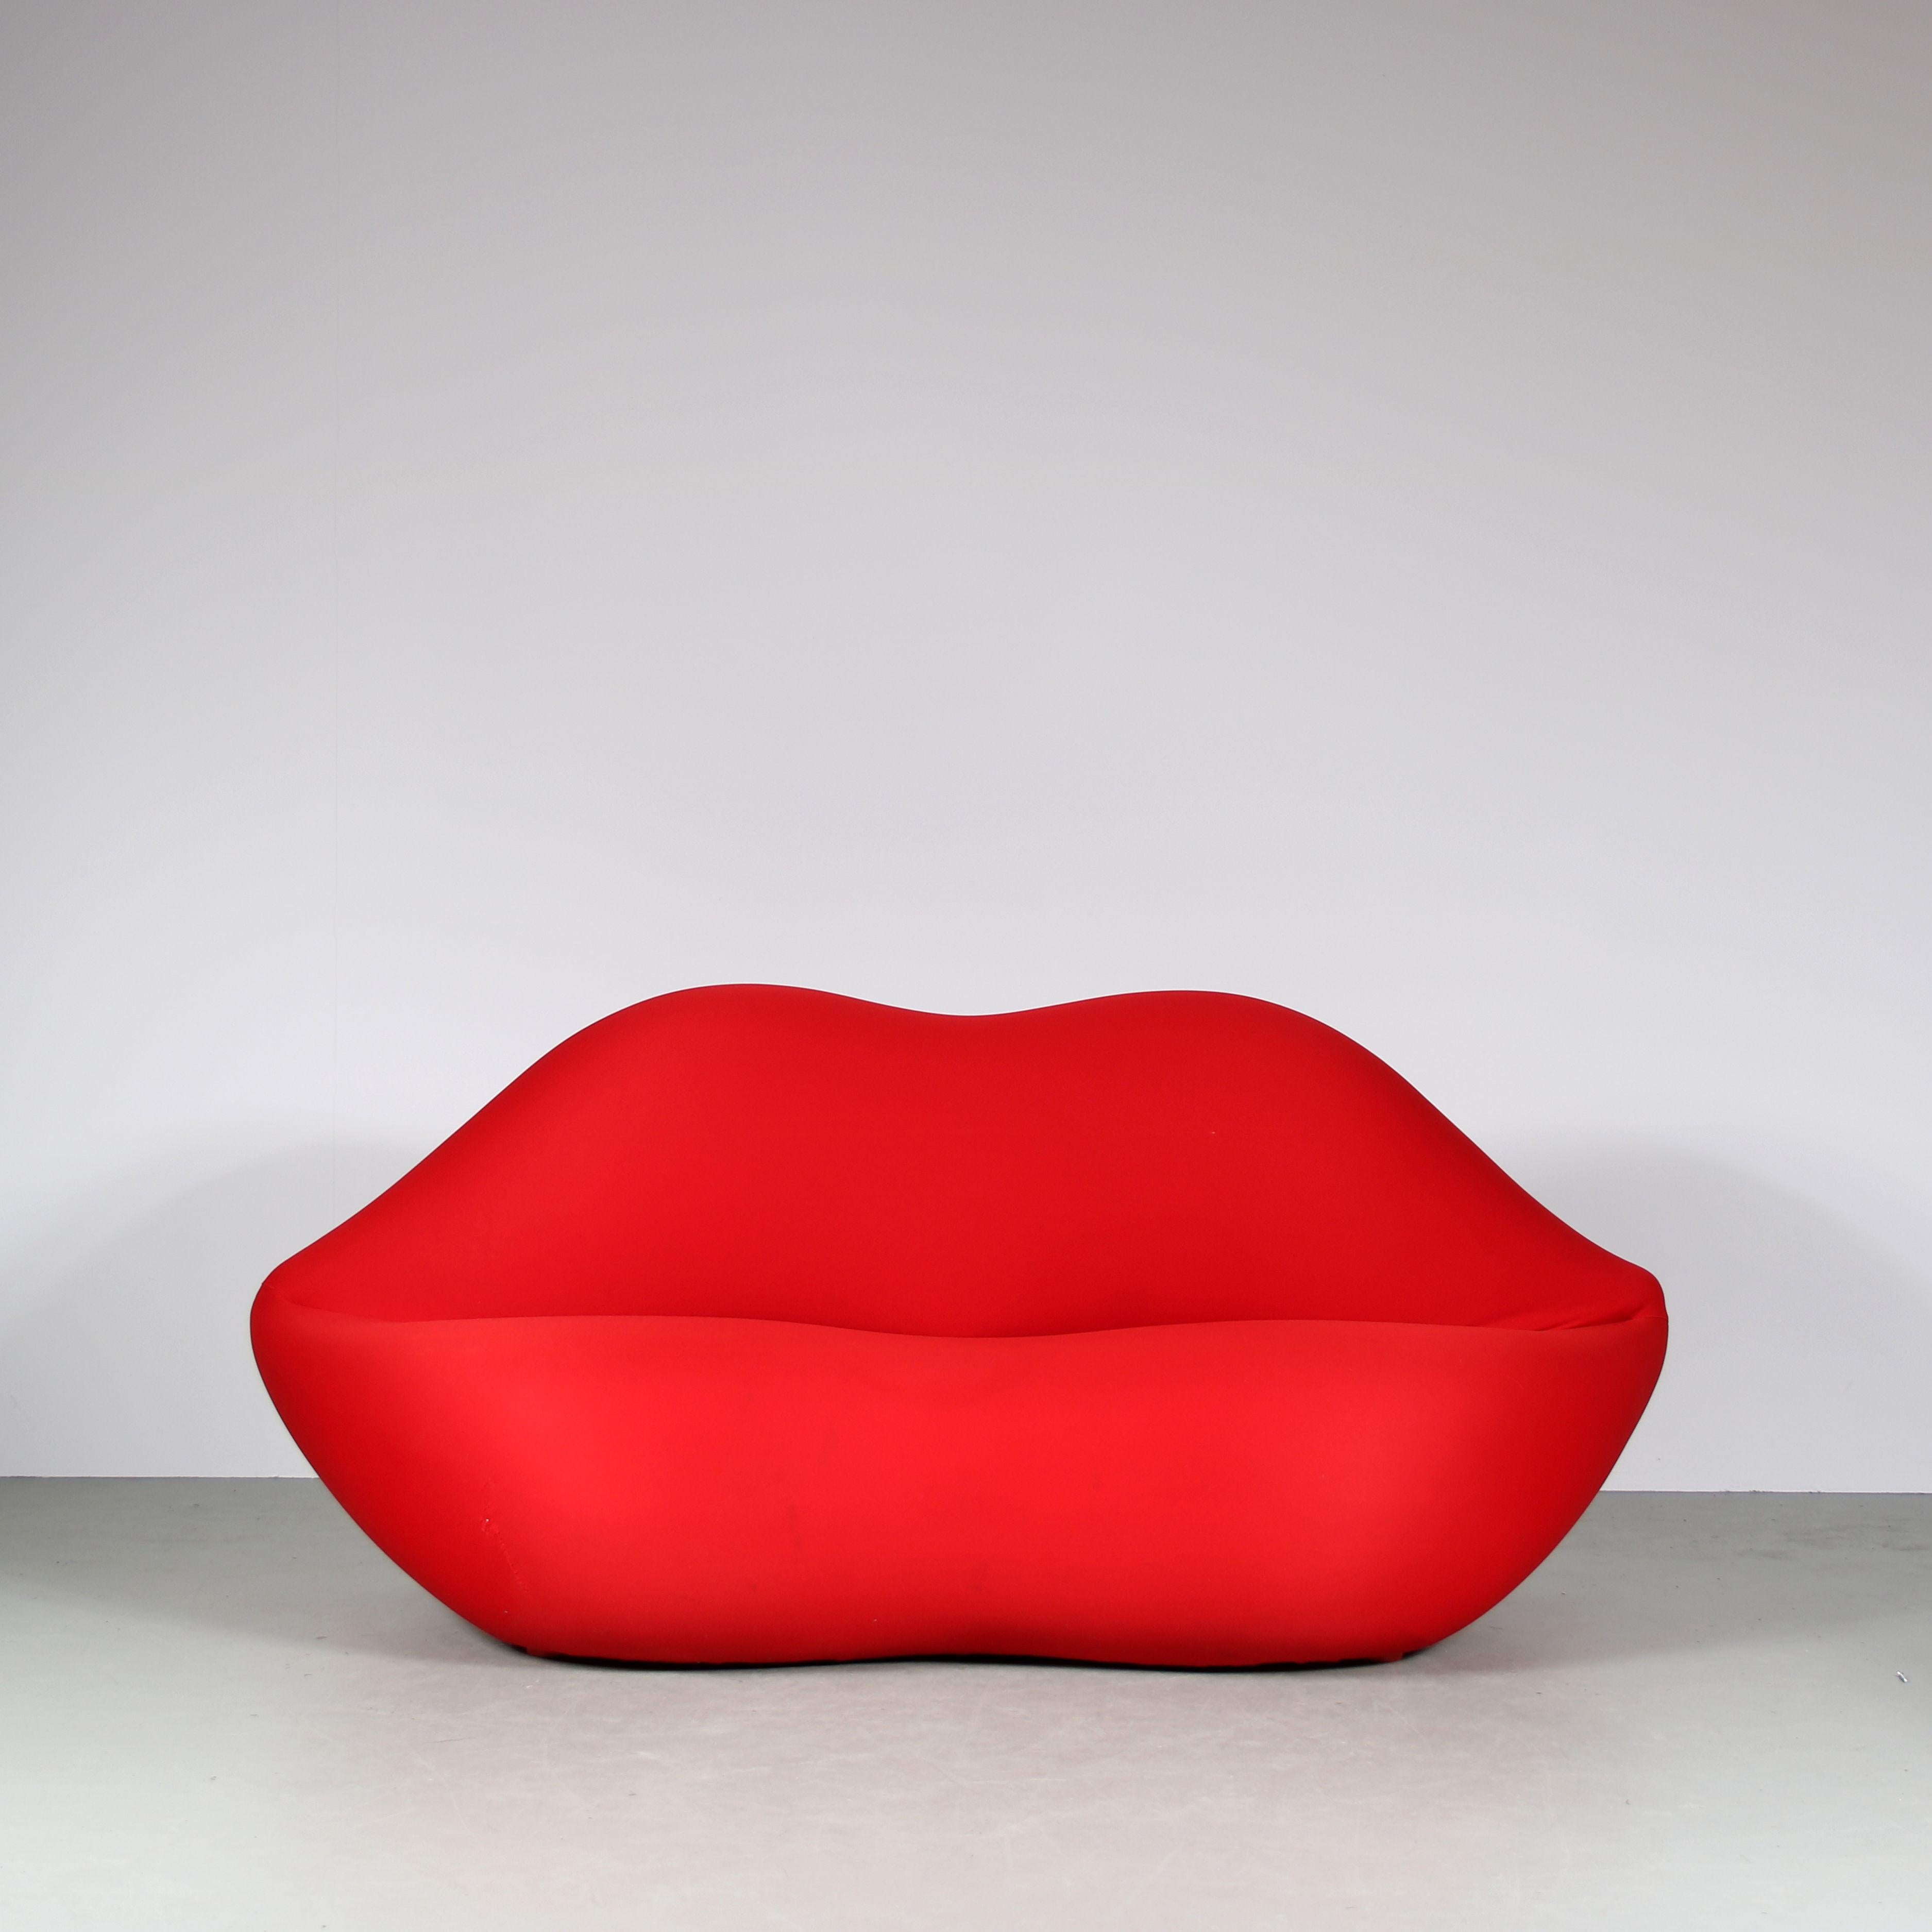 A 1990s “Bocca” sofa designed by Studio 65 and manufactured by Edra in Italy.

The Bocca Sofa, also known as the Lips Sofa, is a design icon that has gained international fame for its playful and provocative design. The sofa was originally created